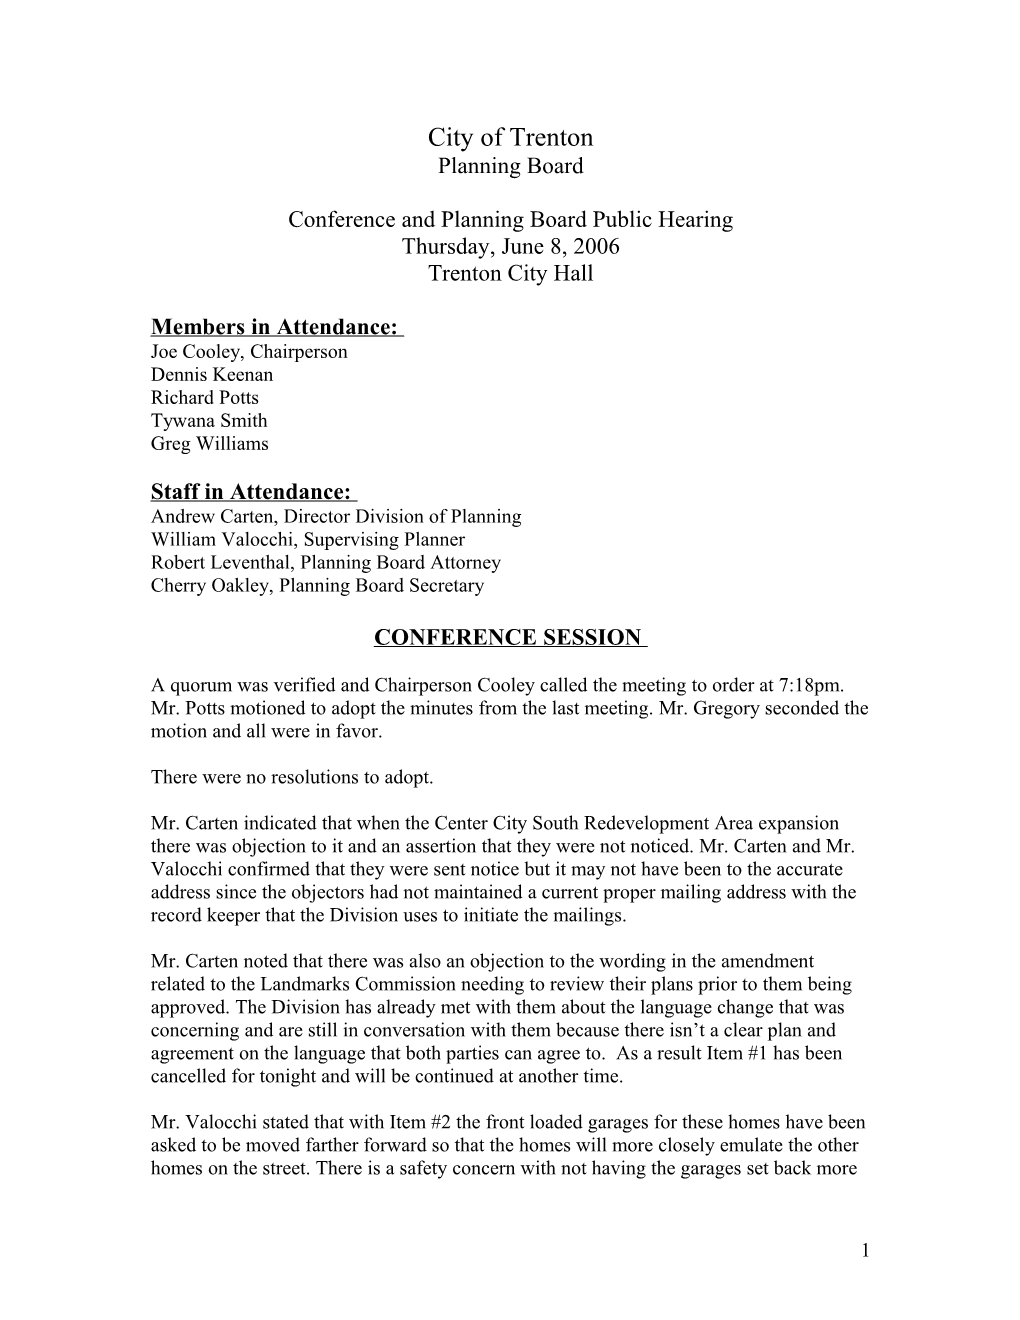 Conference and Planning Board Public Hearing